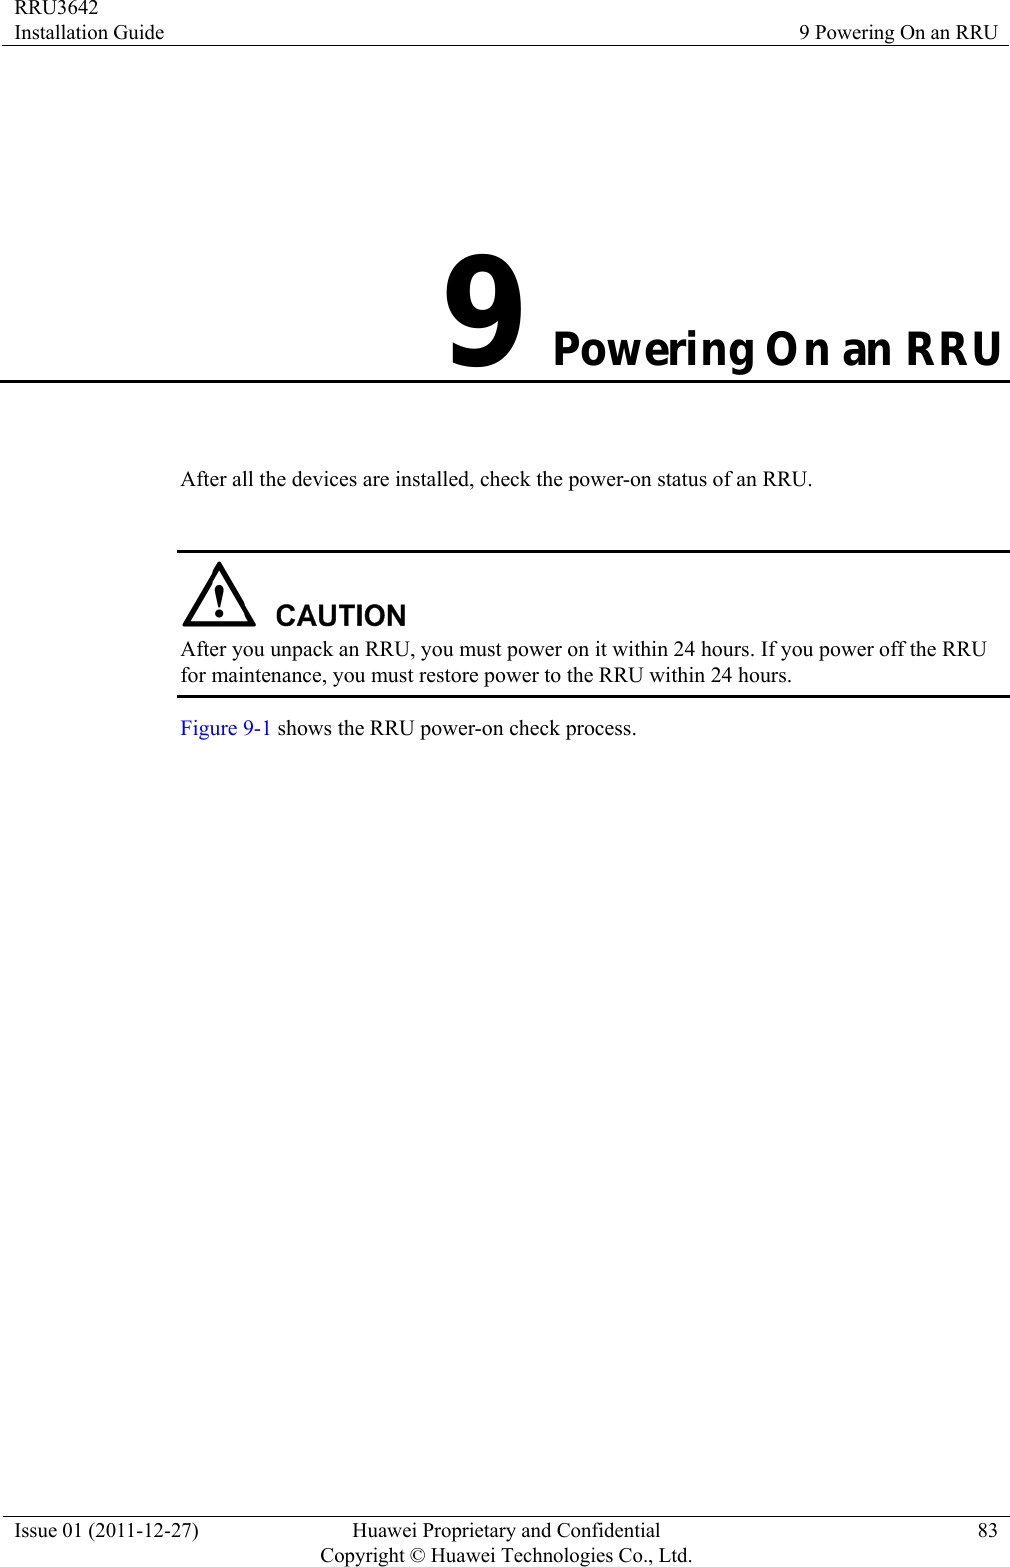 RRU3642 Installation Guide  9 Powering On an RRU Issue 01 (2011-12-27)  Huawei Proprietary and Confidential         Copyright © Huawei Technologies Co., Ltd.83 9 Powering On an RRU After all the devices are installed, check the power-on status of an RRU.   After you unpack an RRU, you must power on it within 24 hours. If you power off the RRU for maintenance, you must restore power to the RRU within 24 hours. Figure 9-1 shows the RRU power-on check process. 